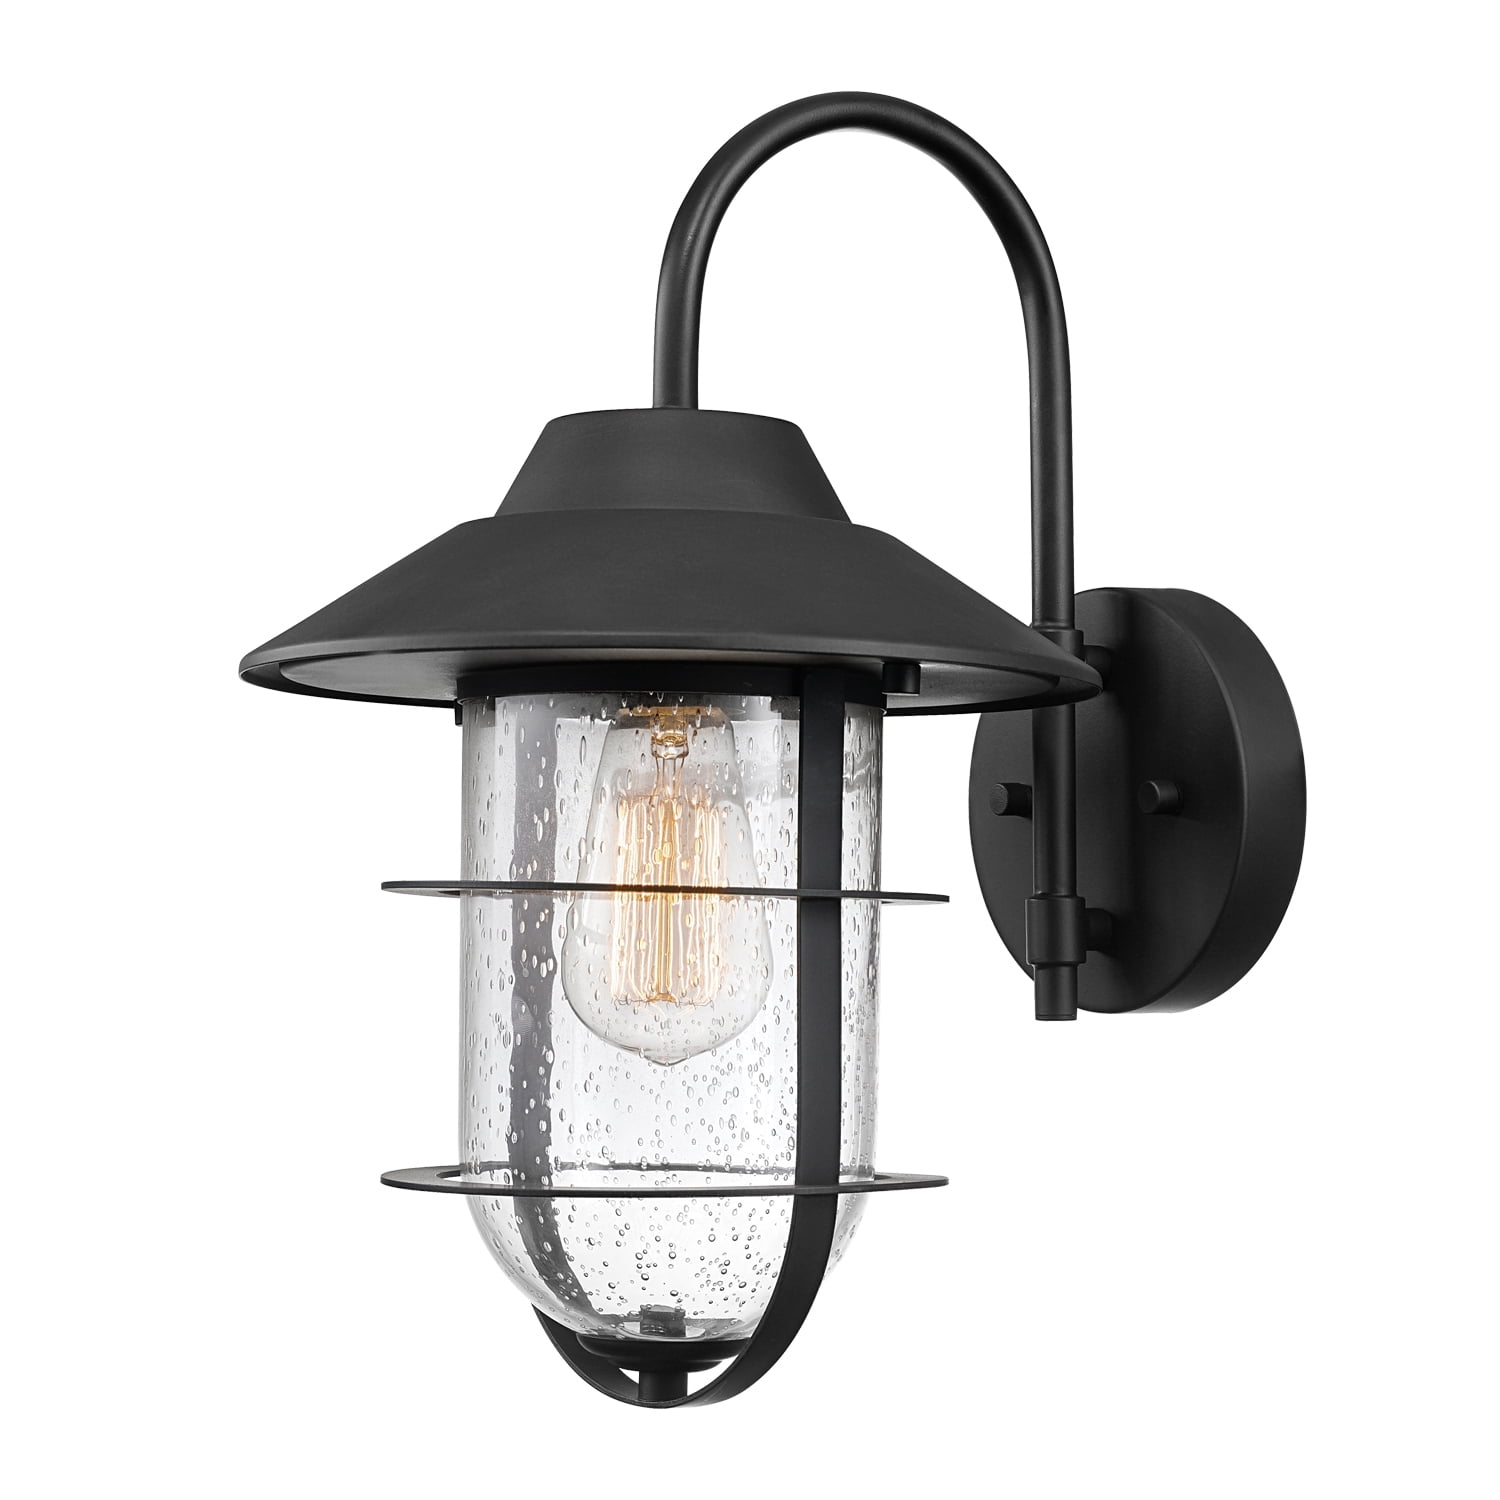 Globe Electric Bolton 1-Light Matte Black Outdoor Indoor Wall Sconce